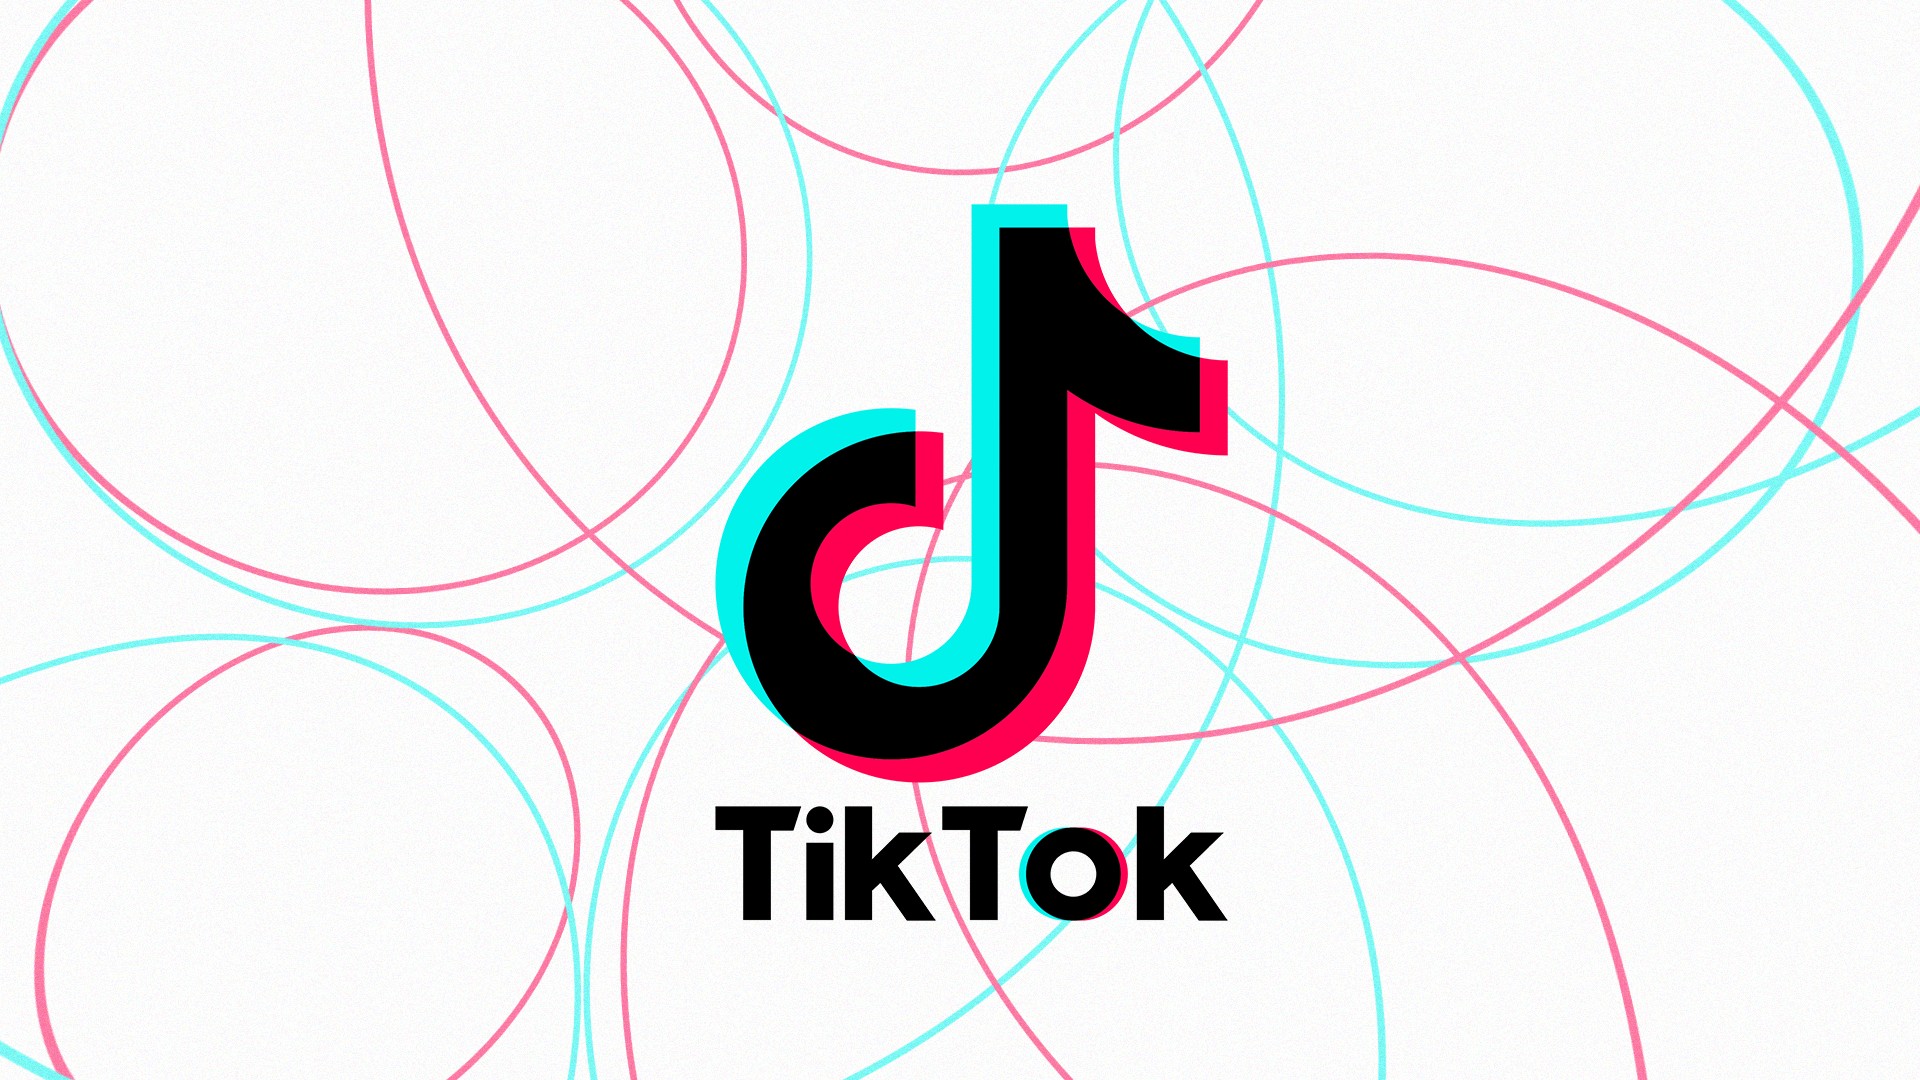 Songs from TikTok can now be saved to Spotify library with a single tap